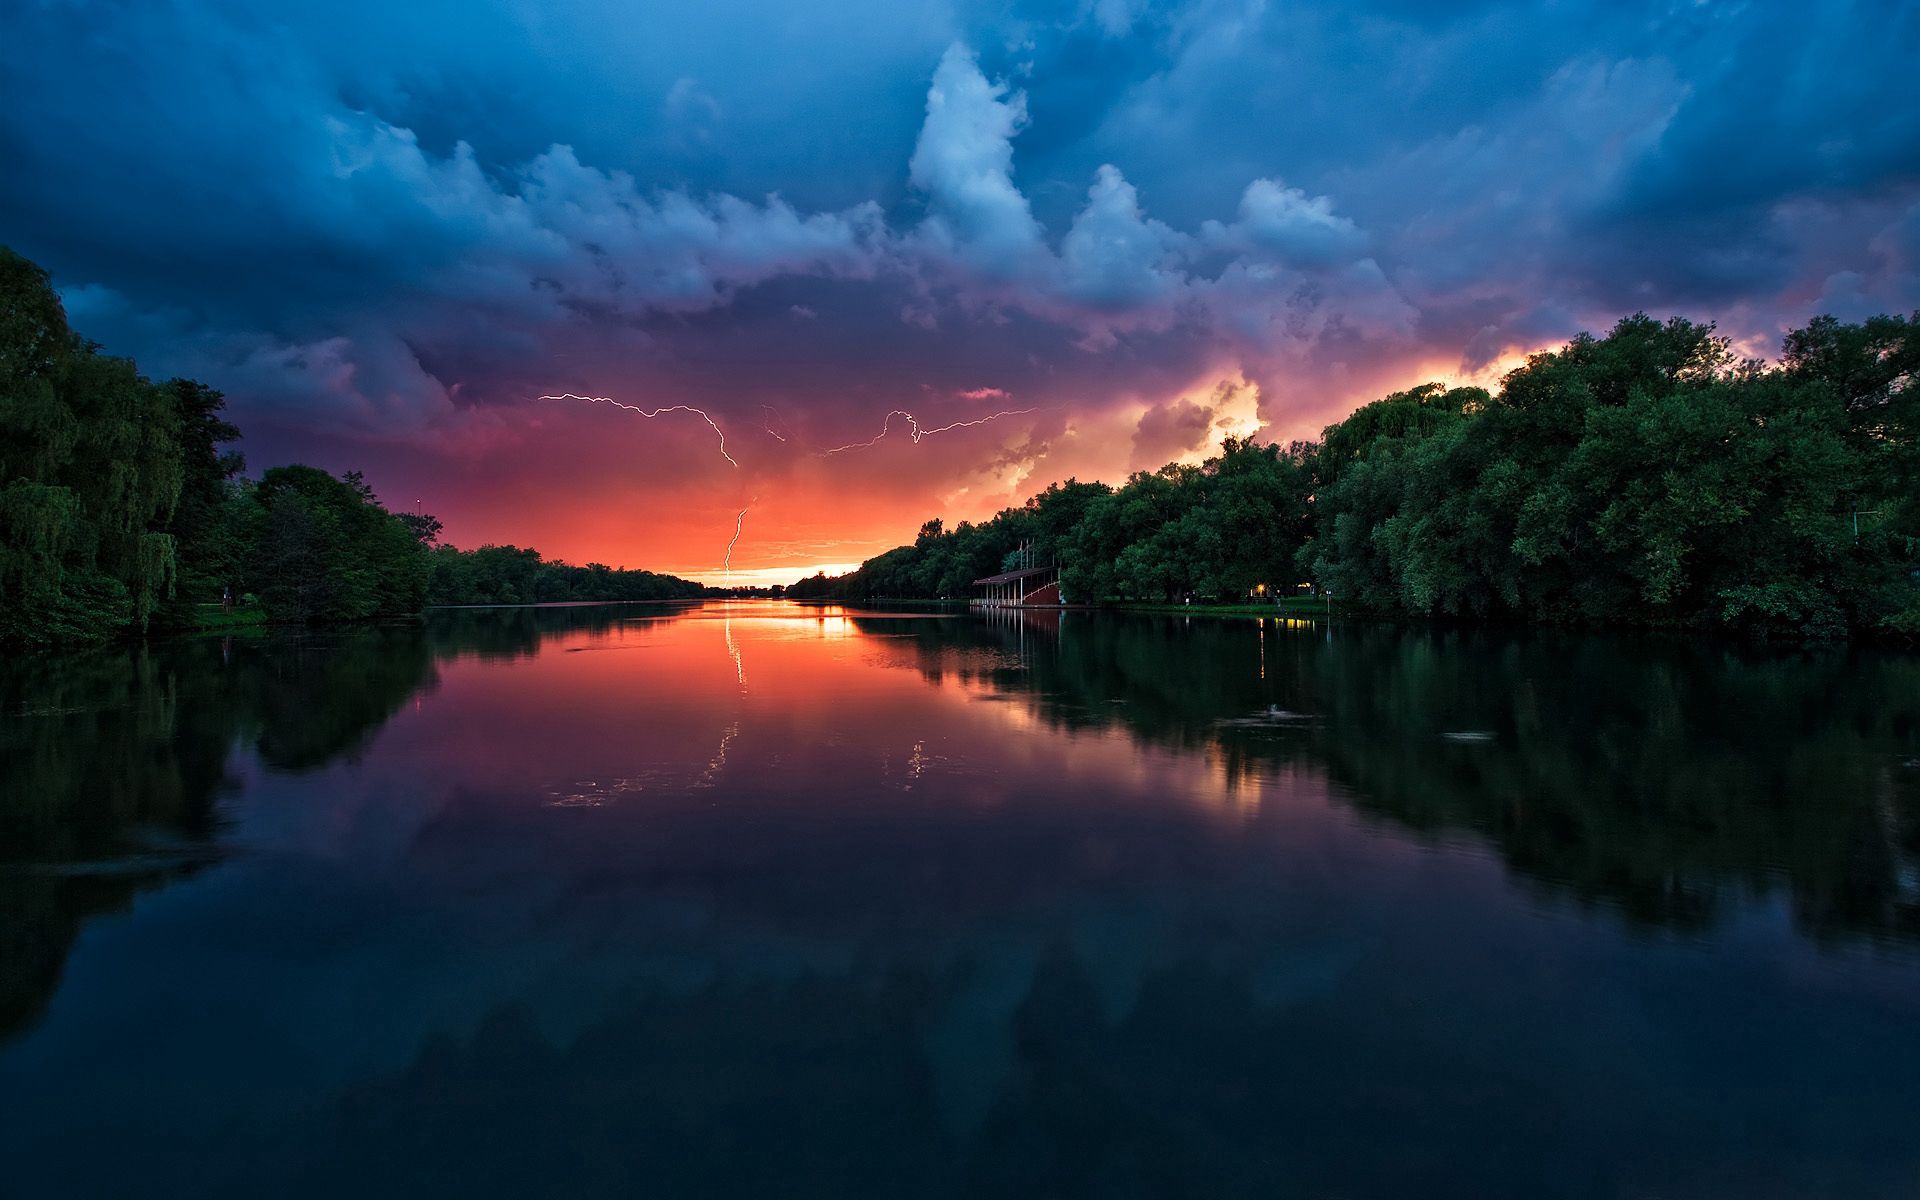 rivers, thunderstorm, nature, trees, clouds, lightning, reflection, storm